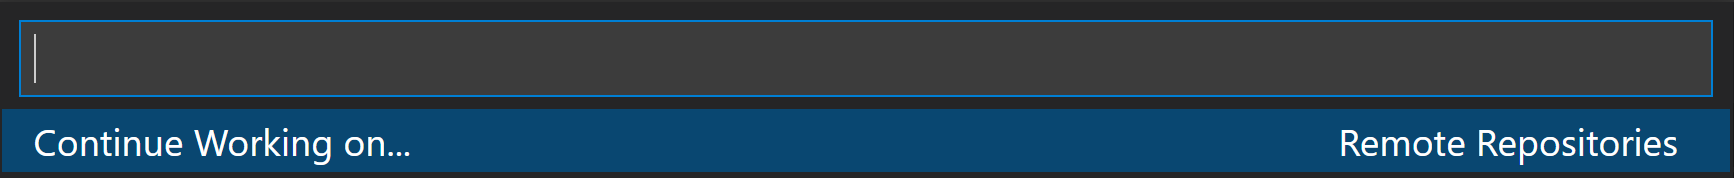 VS Code Command Palette with "Continue Working on..." command